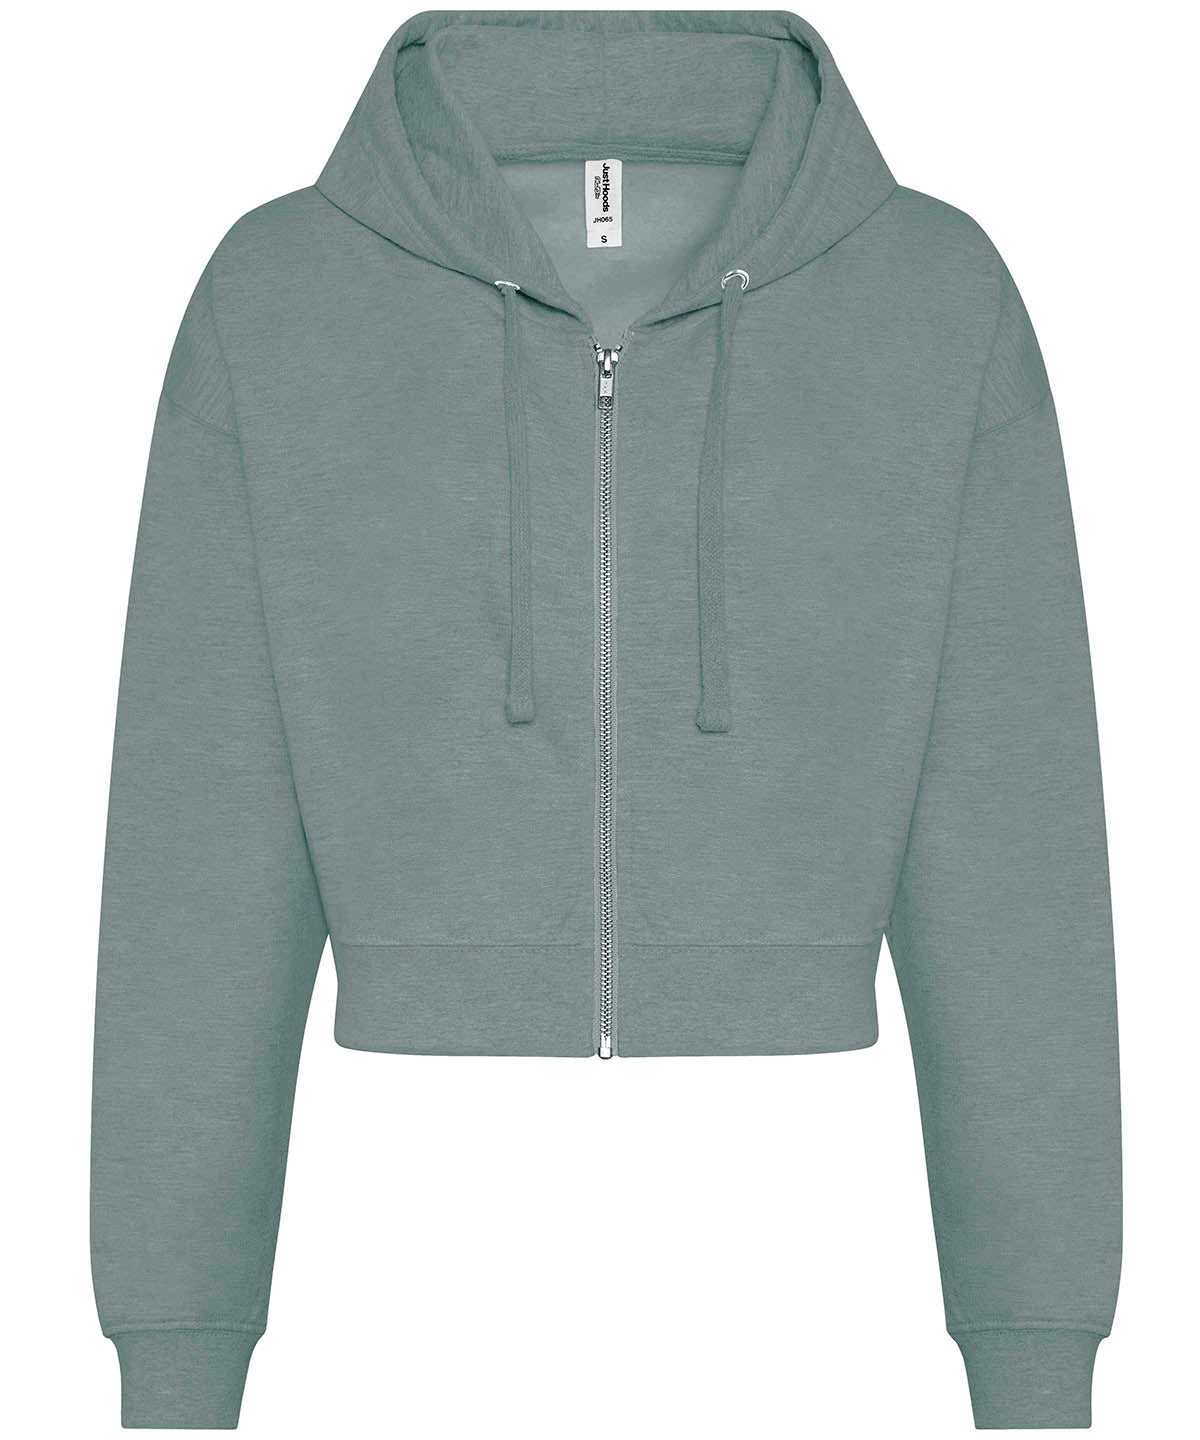 Personalised Hoodies - White AWDis Just Hoods Women's fashion cropped zoodie